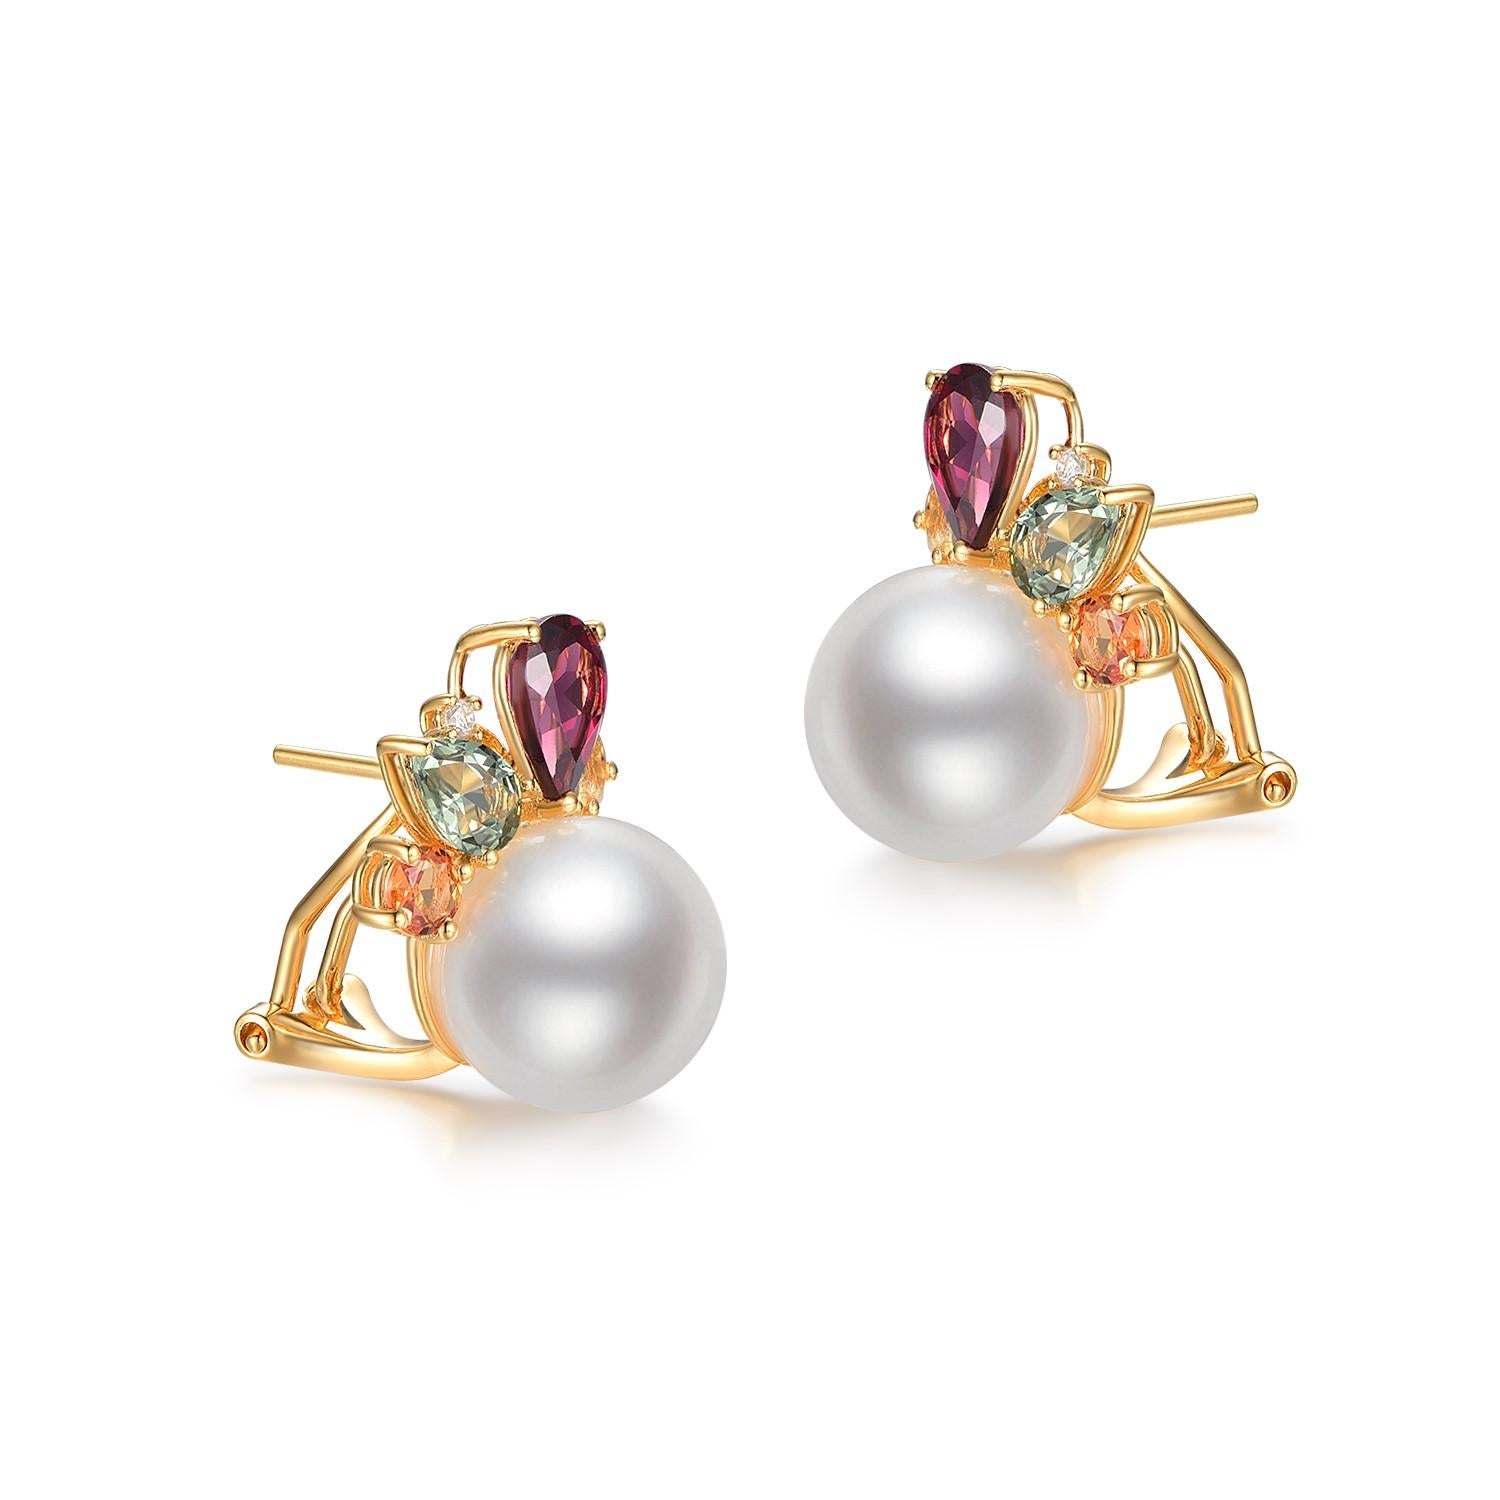 These earrings are a celebration of color and refinement, featuring the luster of South Sea pearls and the vibrancy of fancy sapphires, all set in the gleaming splendor of 18K gold-plated sterling silver. Dominating the composition is an 11mm South